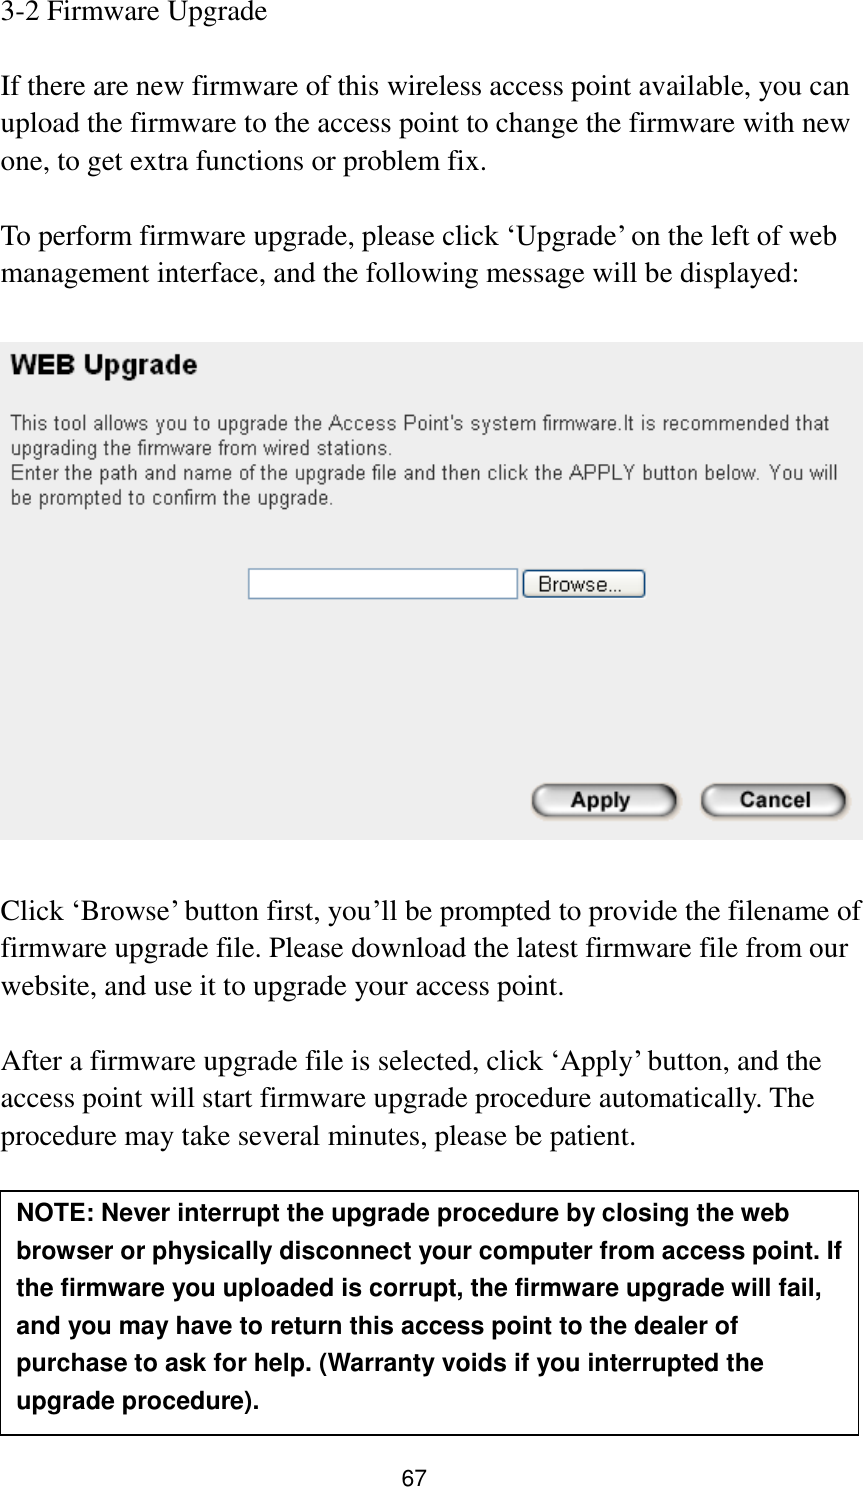 67 3-2 Firmware Upgrade  If there are new firmware of this wireless access point available, you can upload the firmware to the access point to change the firmware with new one, to get extra functions or problem fix.  To perform firmware upgrade, please click „Upgrade‟ on the left of web management interface, and the following message will be displayed:    Click „Browse‟ button first, you‟ll be prompted to provide the filename of firmware upgrade file. Please download the latest firmware file from our website, and use it to upgrade your access point.    After a firmware upgrade file is selected, click „Apply‟ button, and the access point will start firmware upgrade procedure automatically. The procedure may take several minutes, please be patient.   NOTE: Never interrupt the upgrade procedure by closing the web browser or physically disconnect your computer from access point. If the firmware you uploaded is corrupt, the firmware upgrade will fail, and you may have to return this access point to the dealer of purchase to ask for help. (Warranty voids if you interrupted the upgrade procedure).   